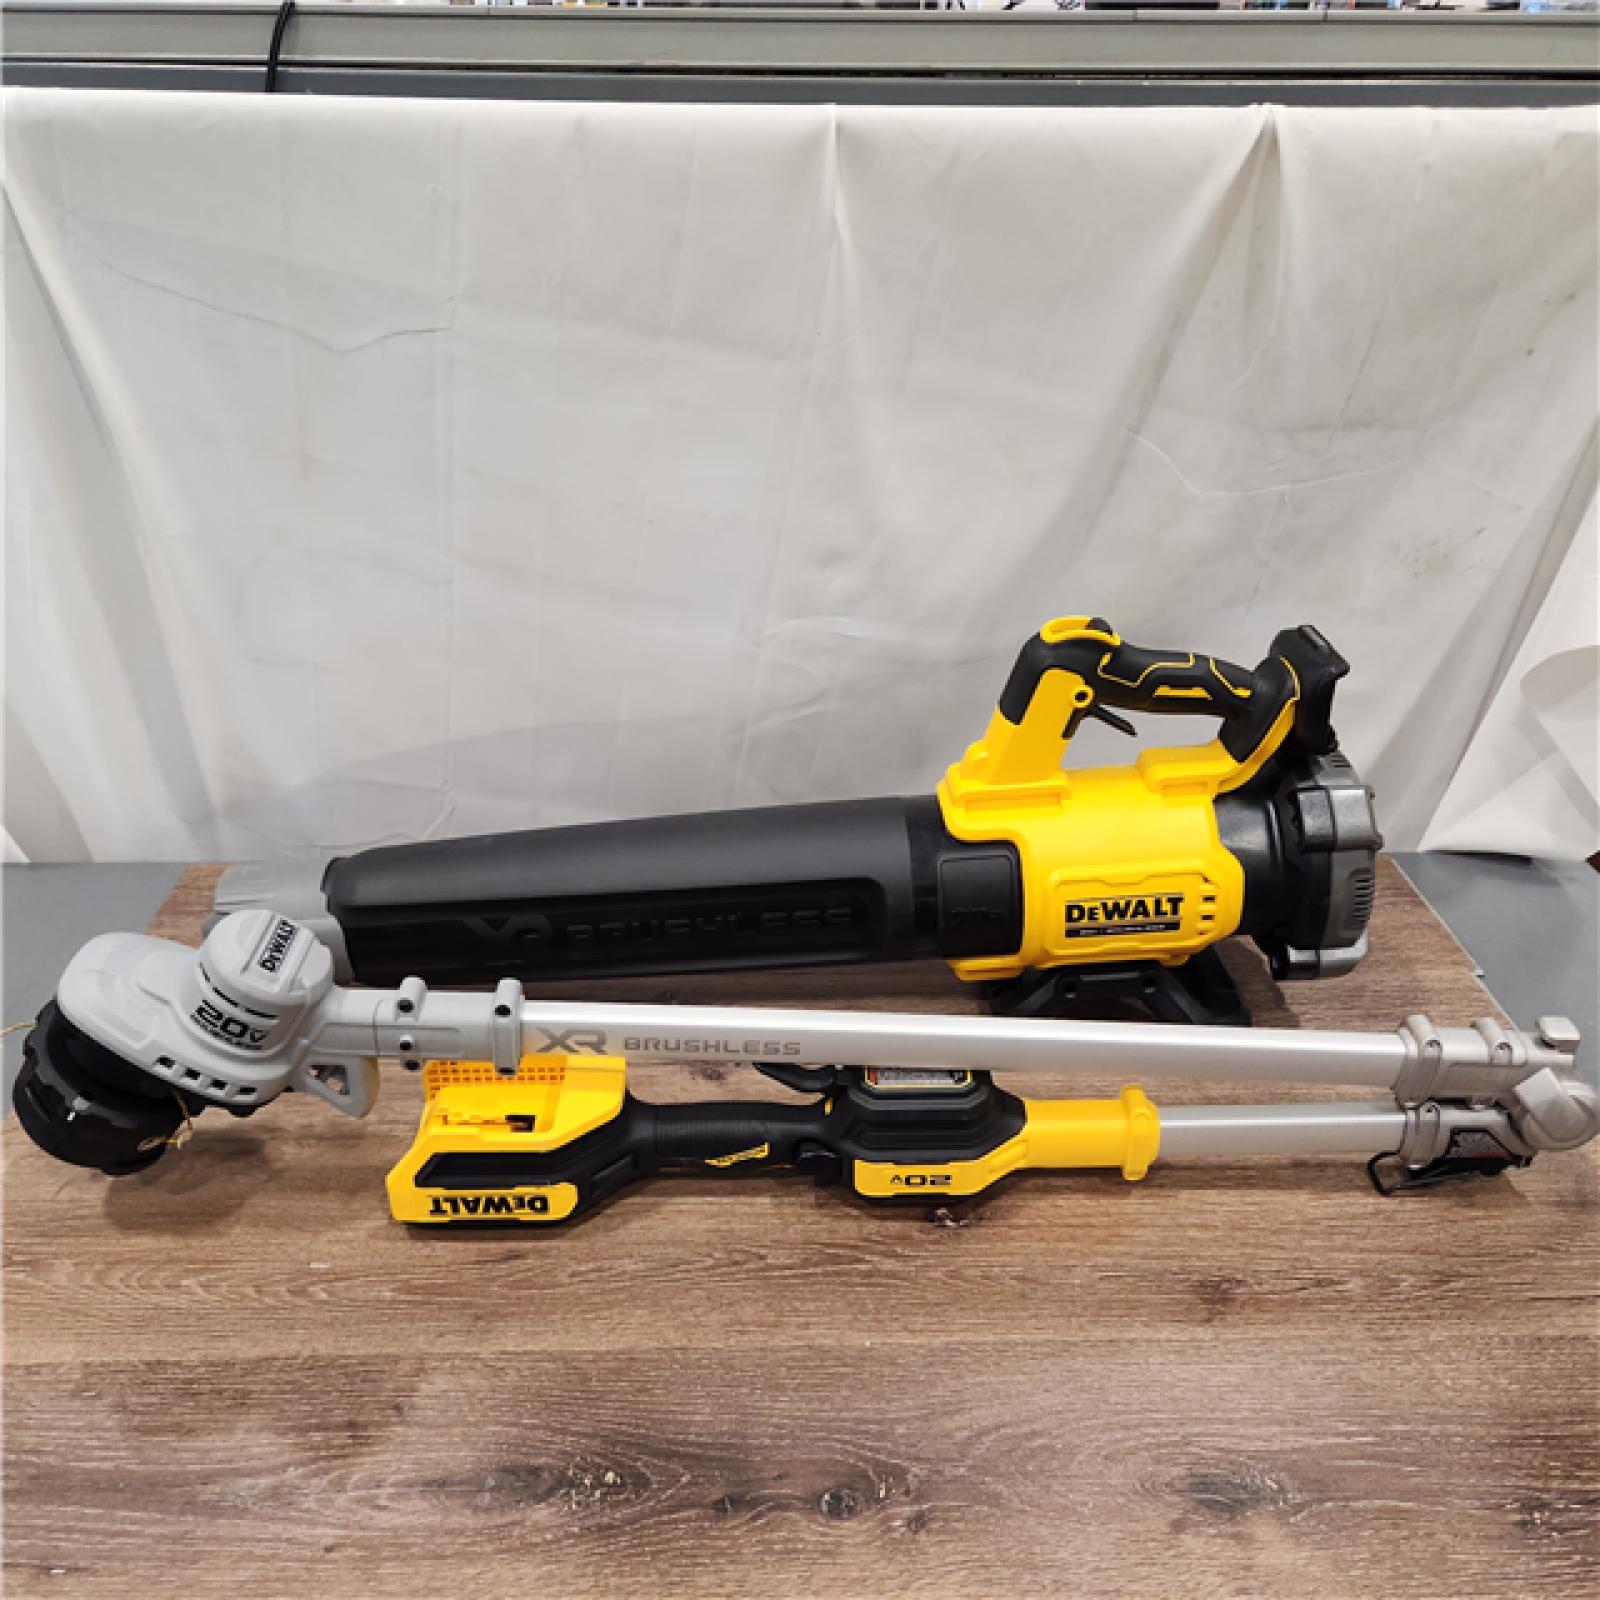 AS-IS DEWALT 20V MAX Cordless Battery Powered String Trimmer & Leaf Blower Combo Kit with (1) 4.0 Ah Battery and Charger